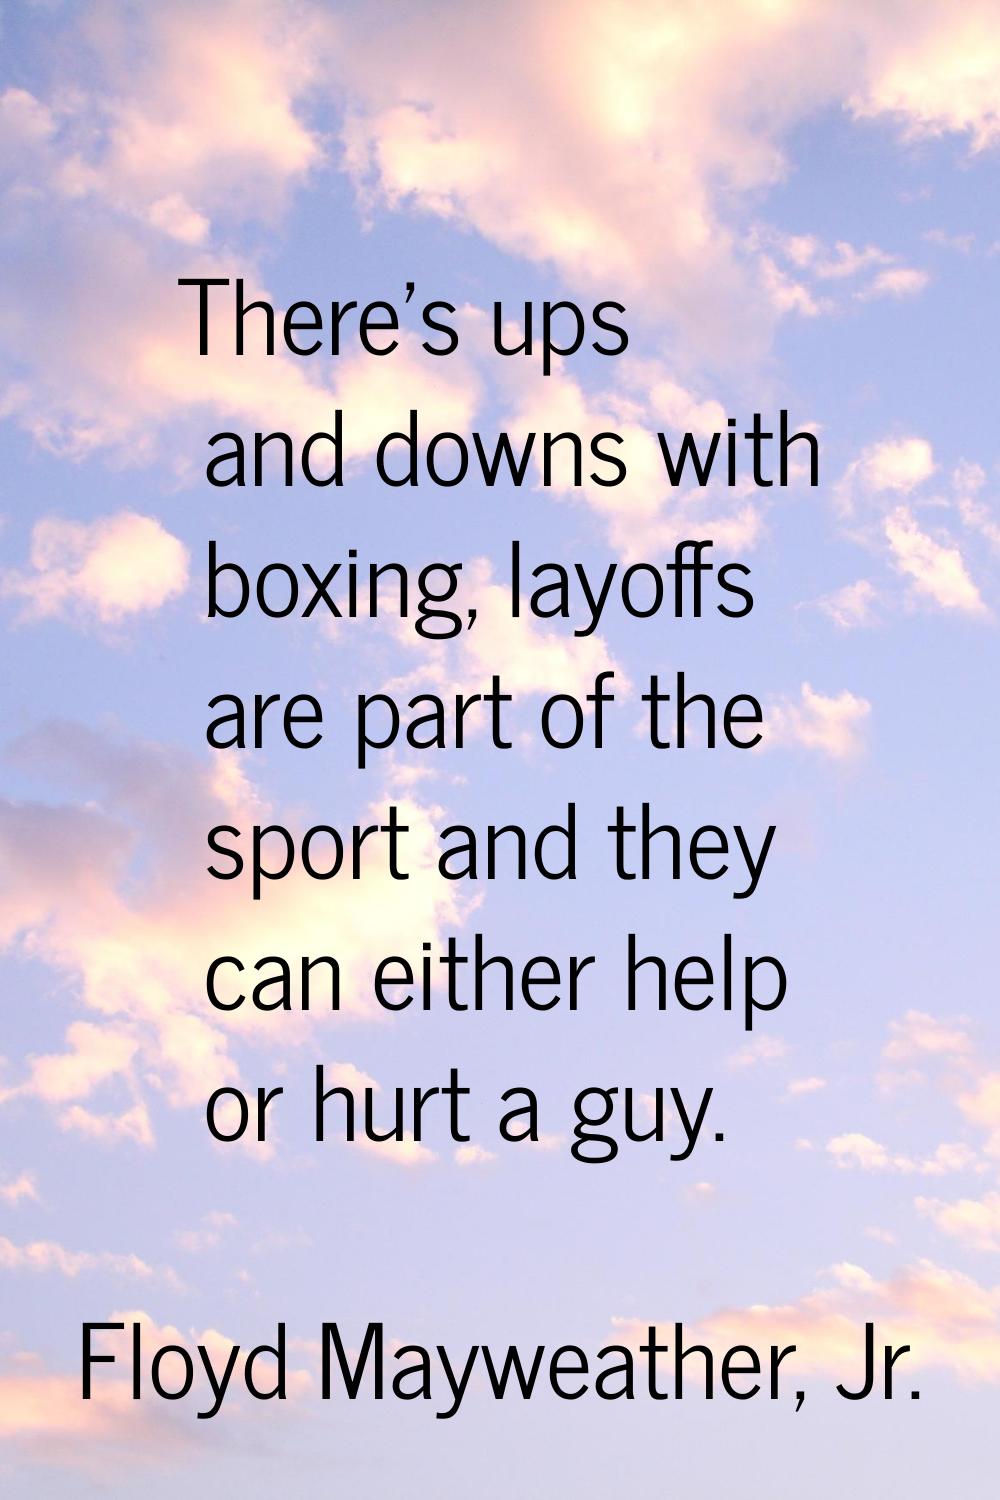 There's ups and downs with boxing, layoffs are part of the sport and they can either help or hurt a